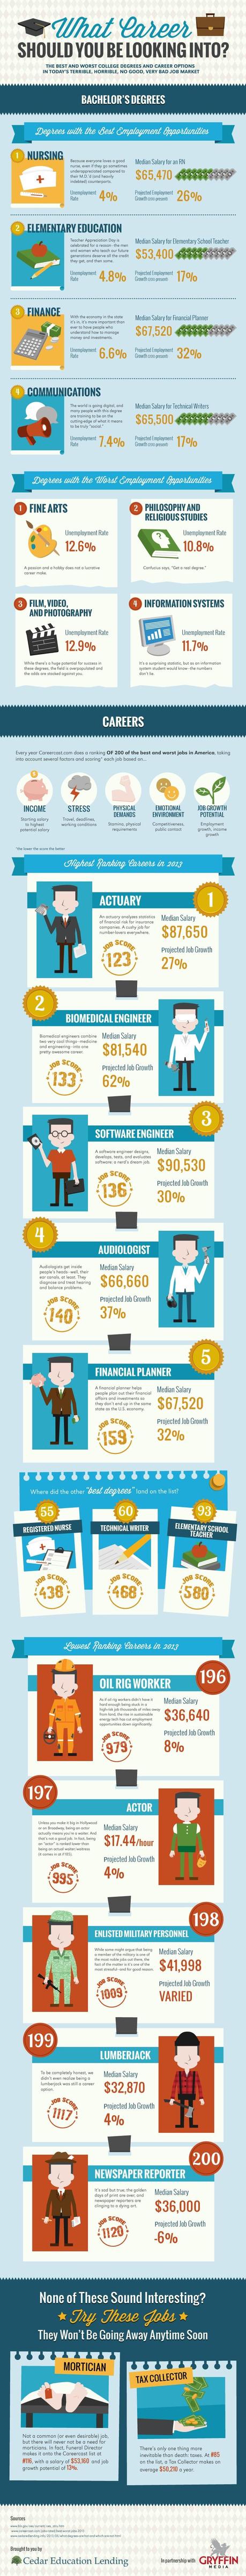 Career Infographic: What’s Your Next Job?